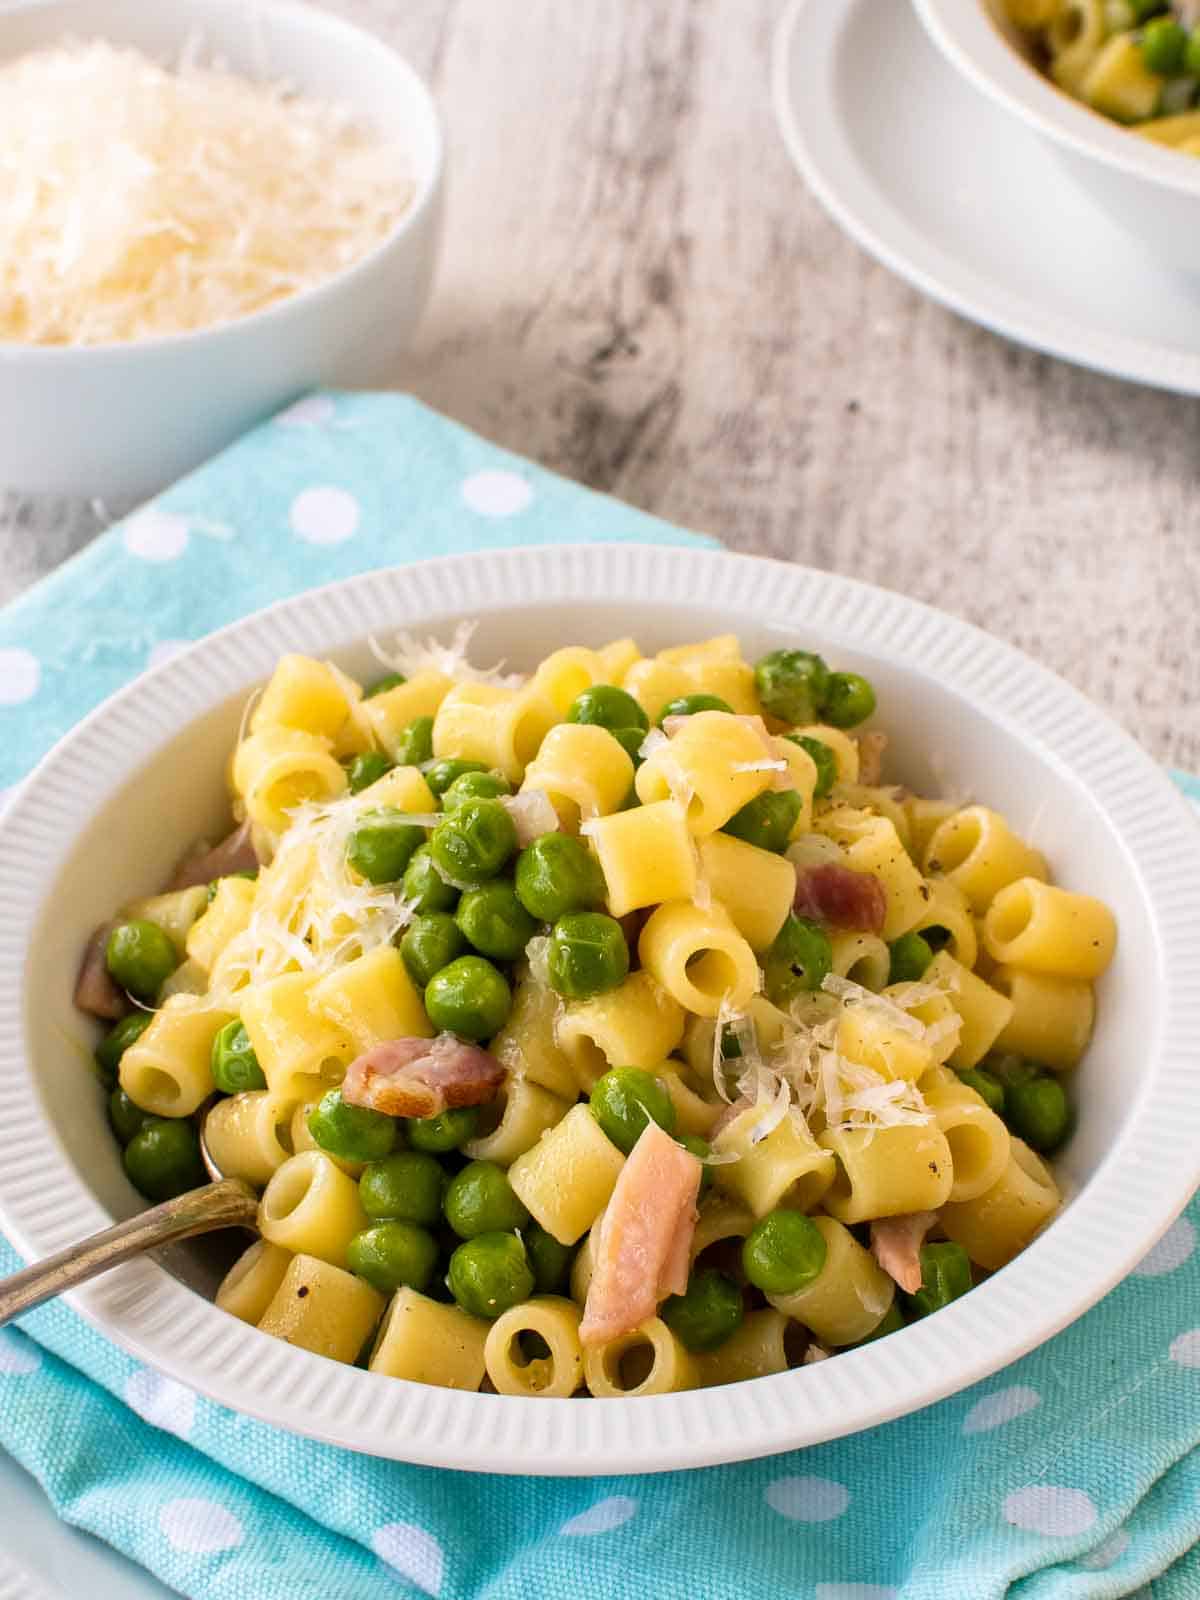 Pasta and peas in a white bowl on a sky blue napkin.